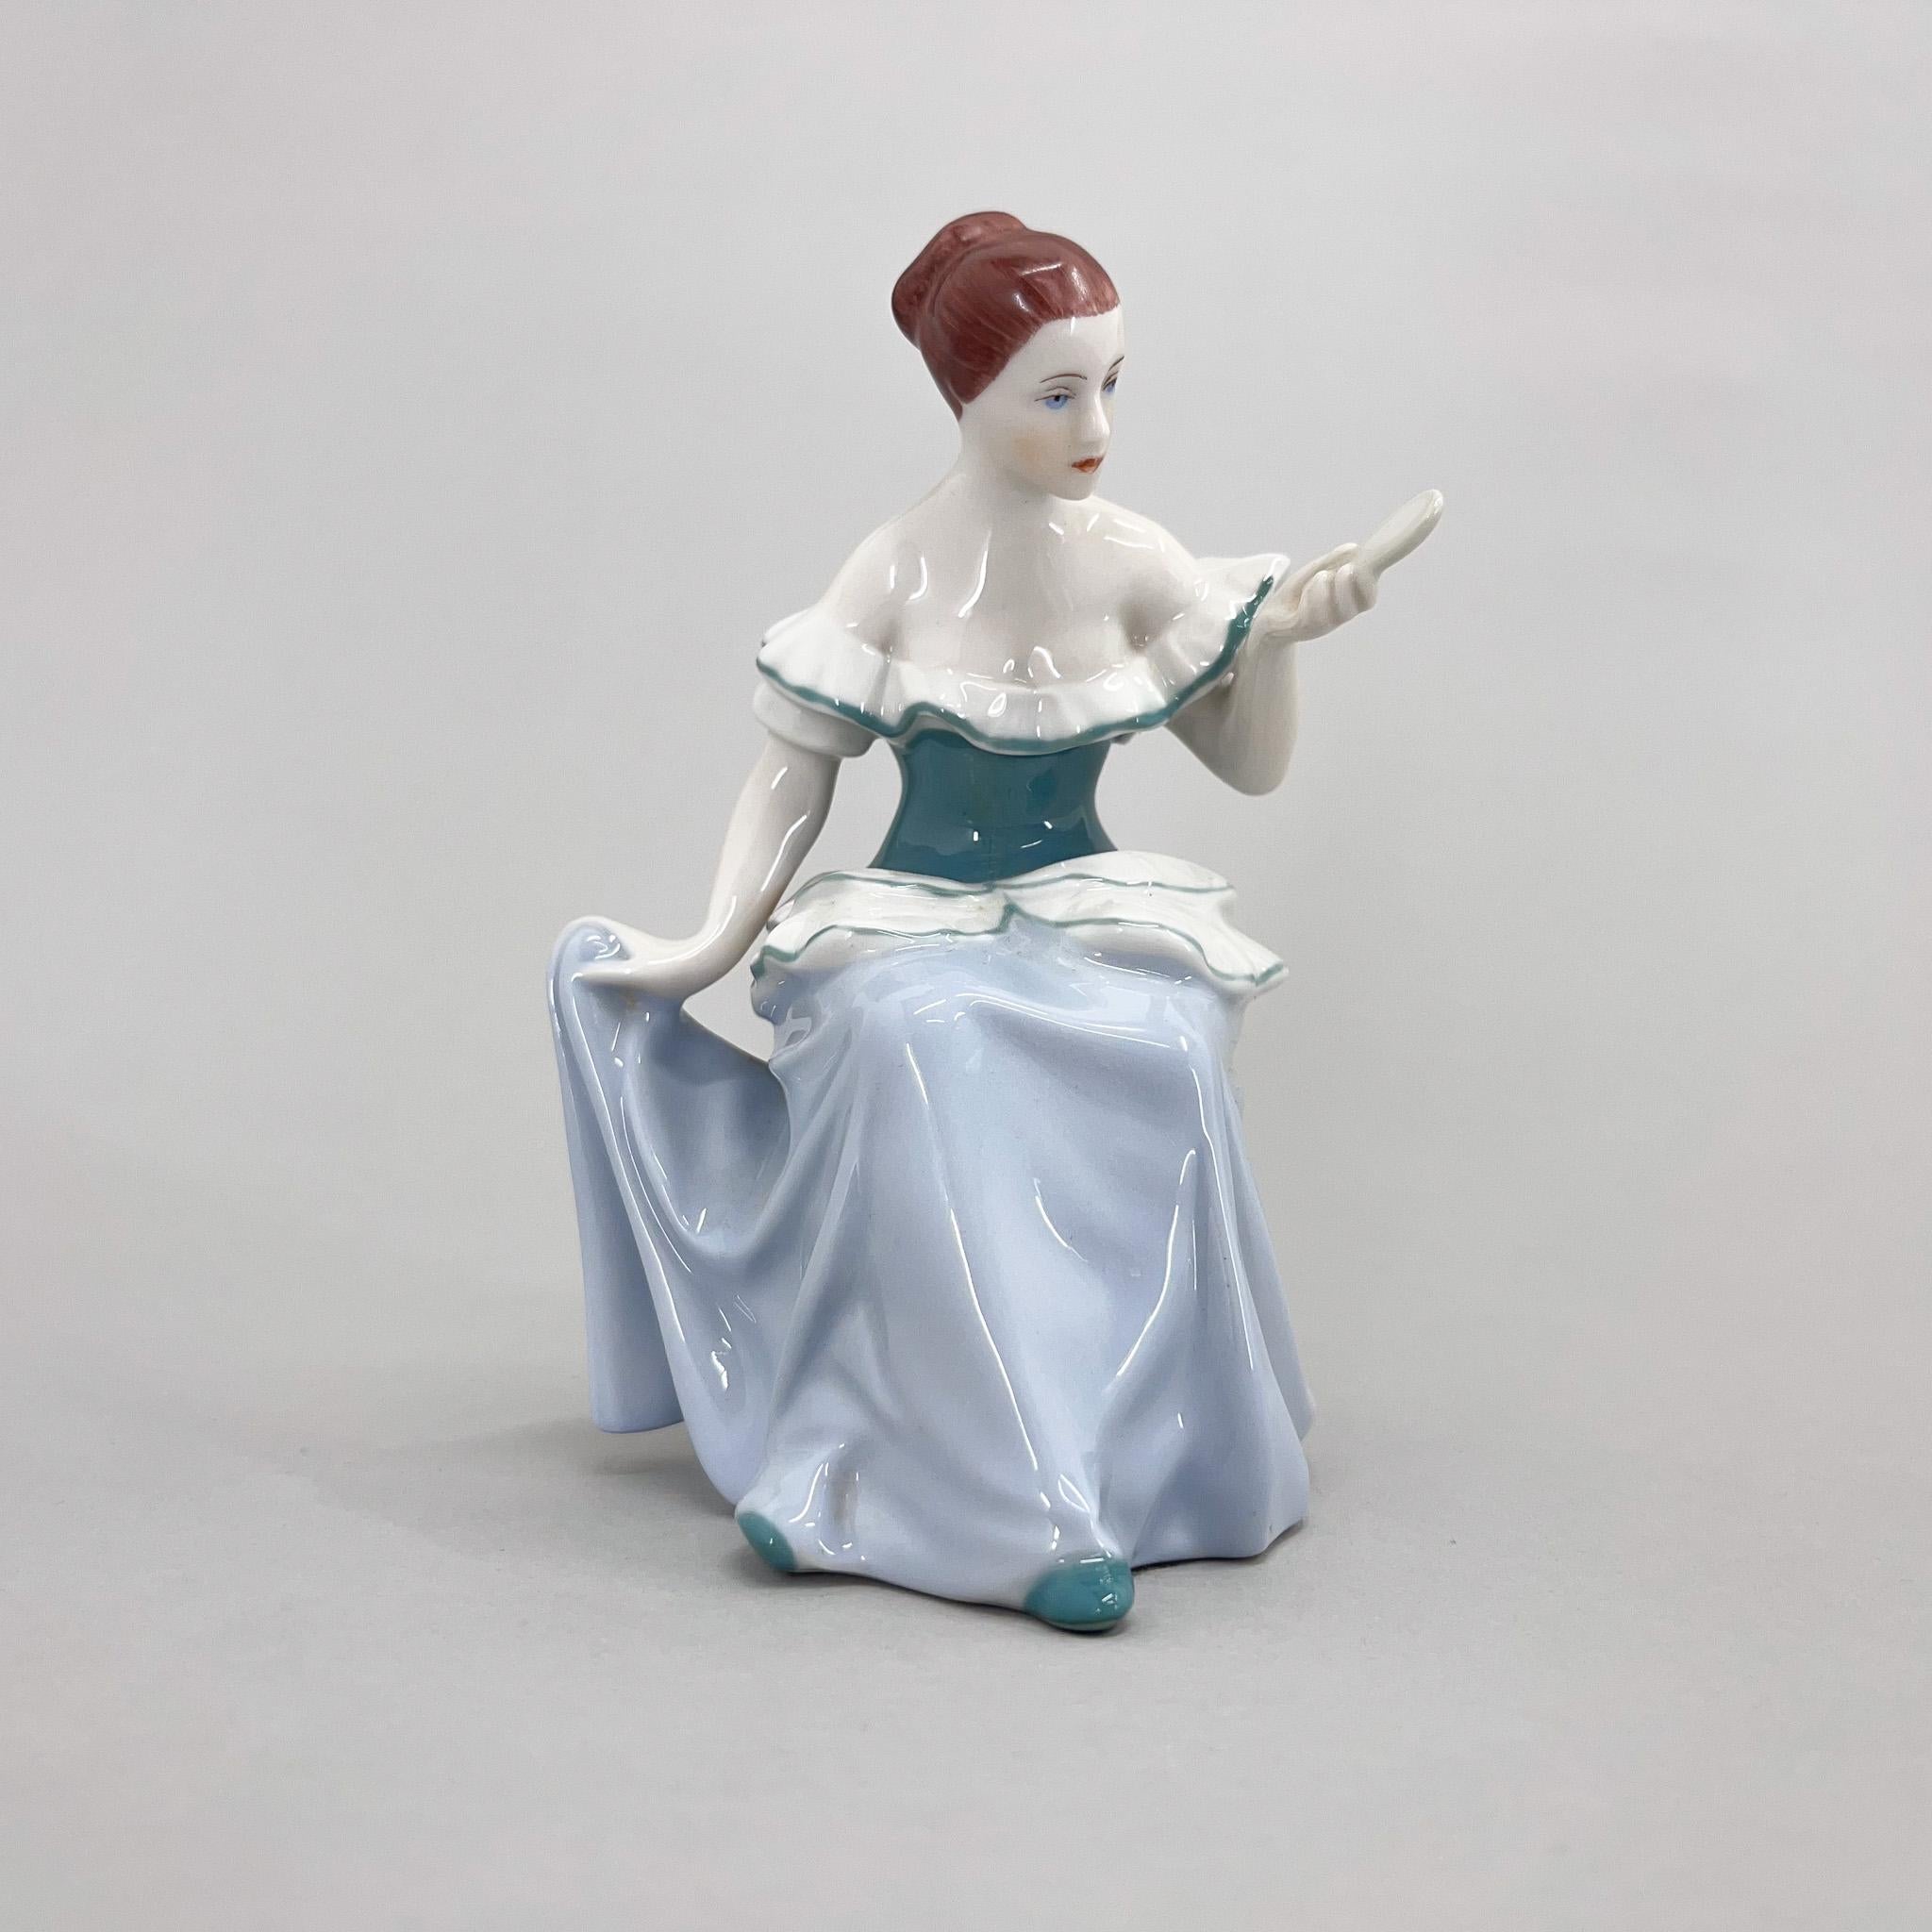 Vintage porcelain statue produced by famous Royal Dux in former Czechoslovakia in the 1970's.